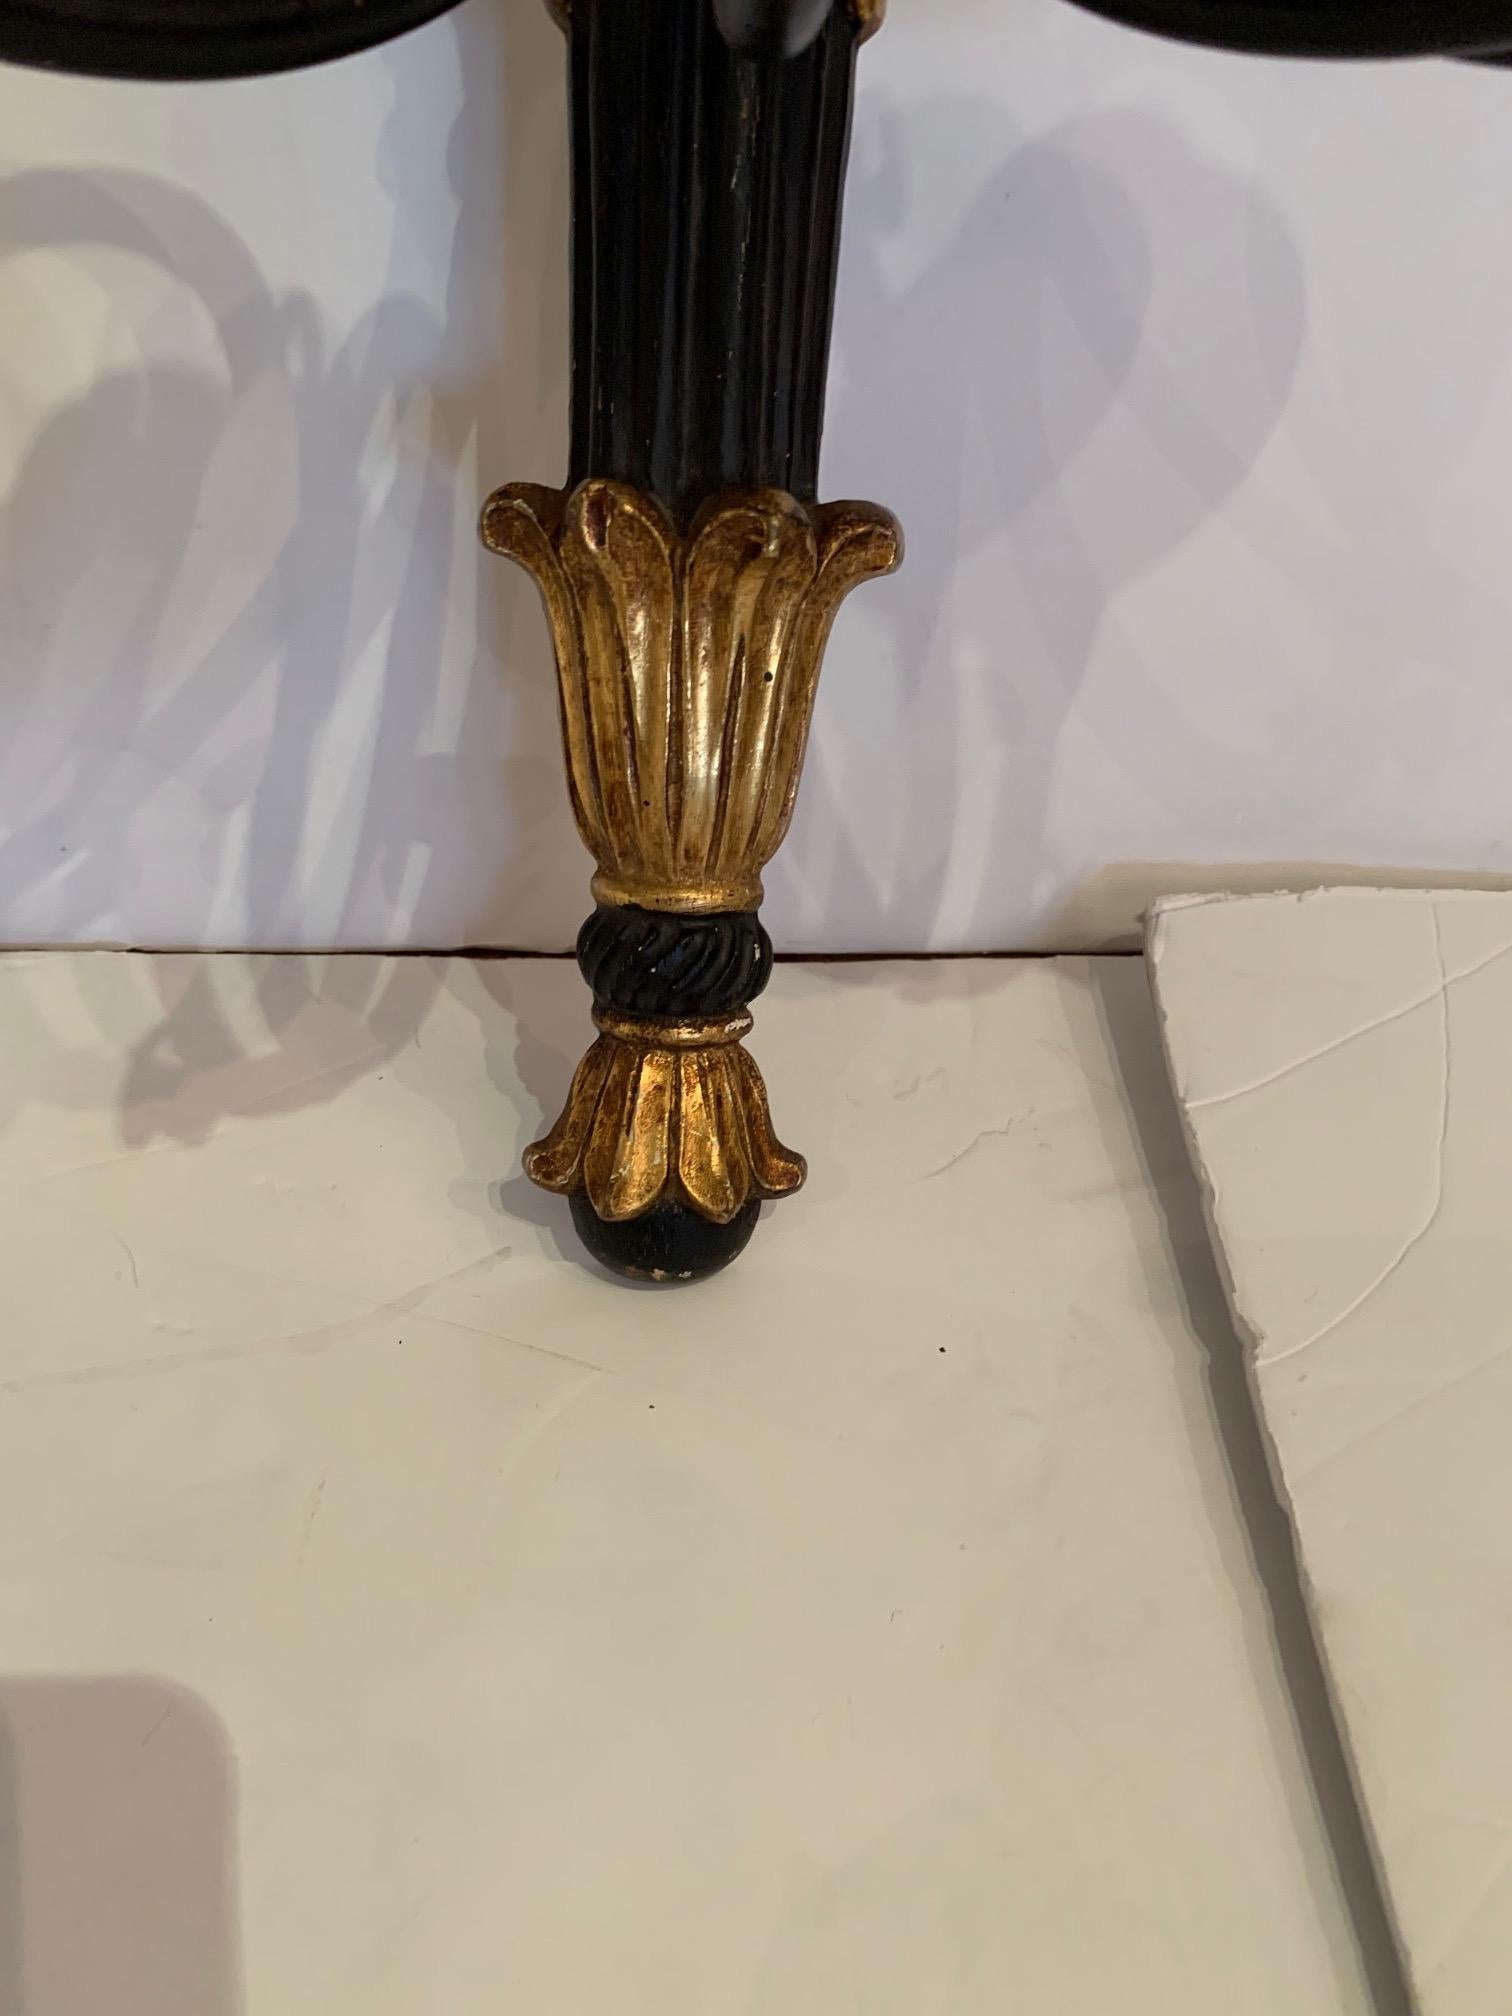 Pair of eye-catching Regency style black and gold sconces having 3 arms each.
Note: we have another pair listed that is slightly different but make a great set of 4.